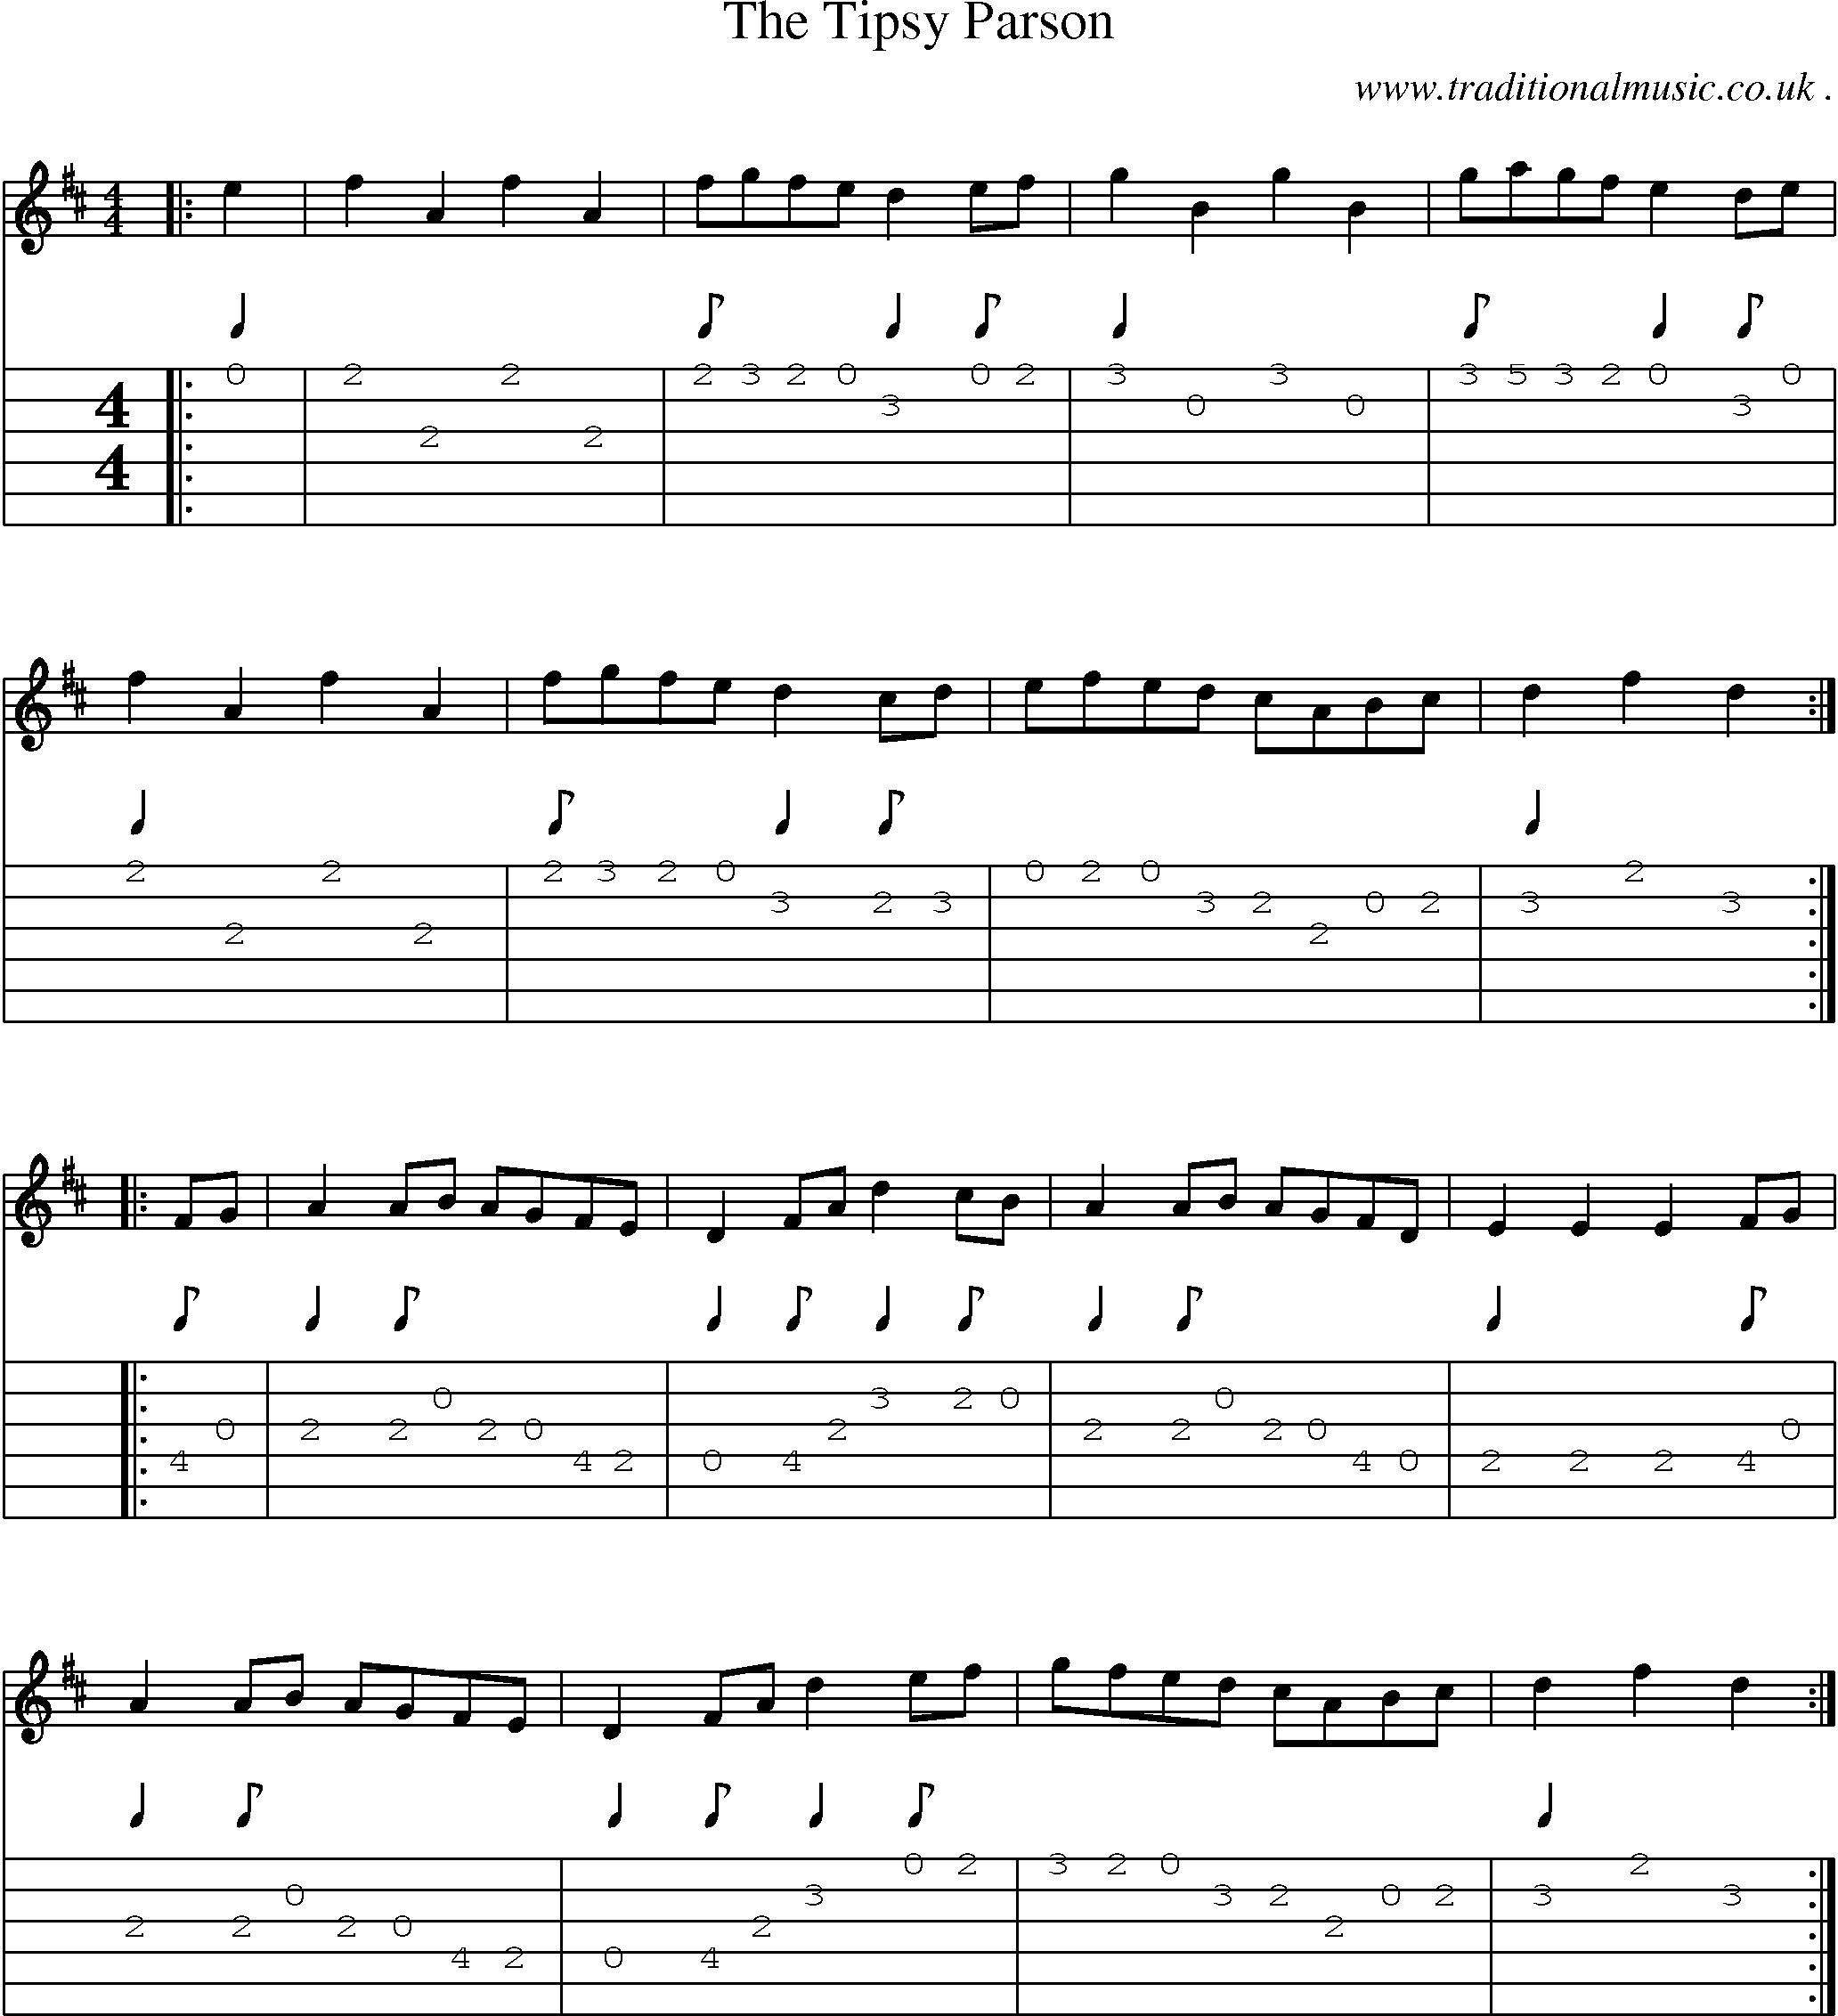 Sheet-Music and Guitar Tabs for The Tipsy Parson